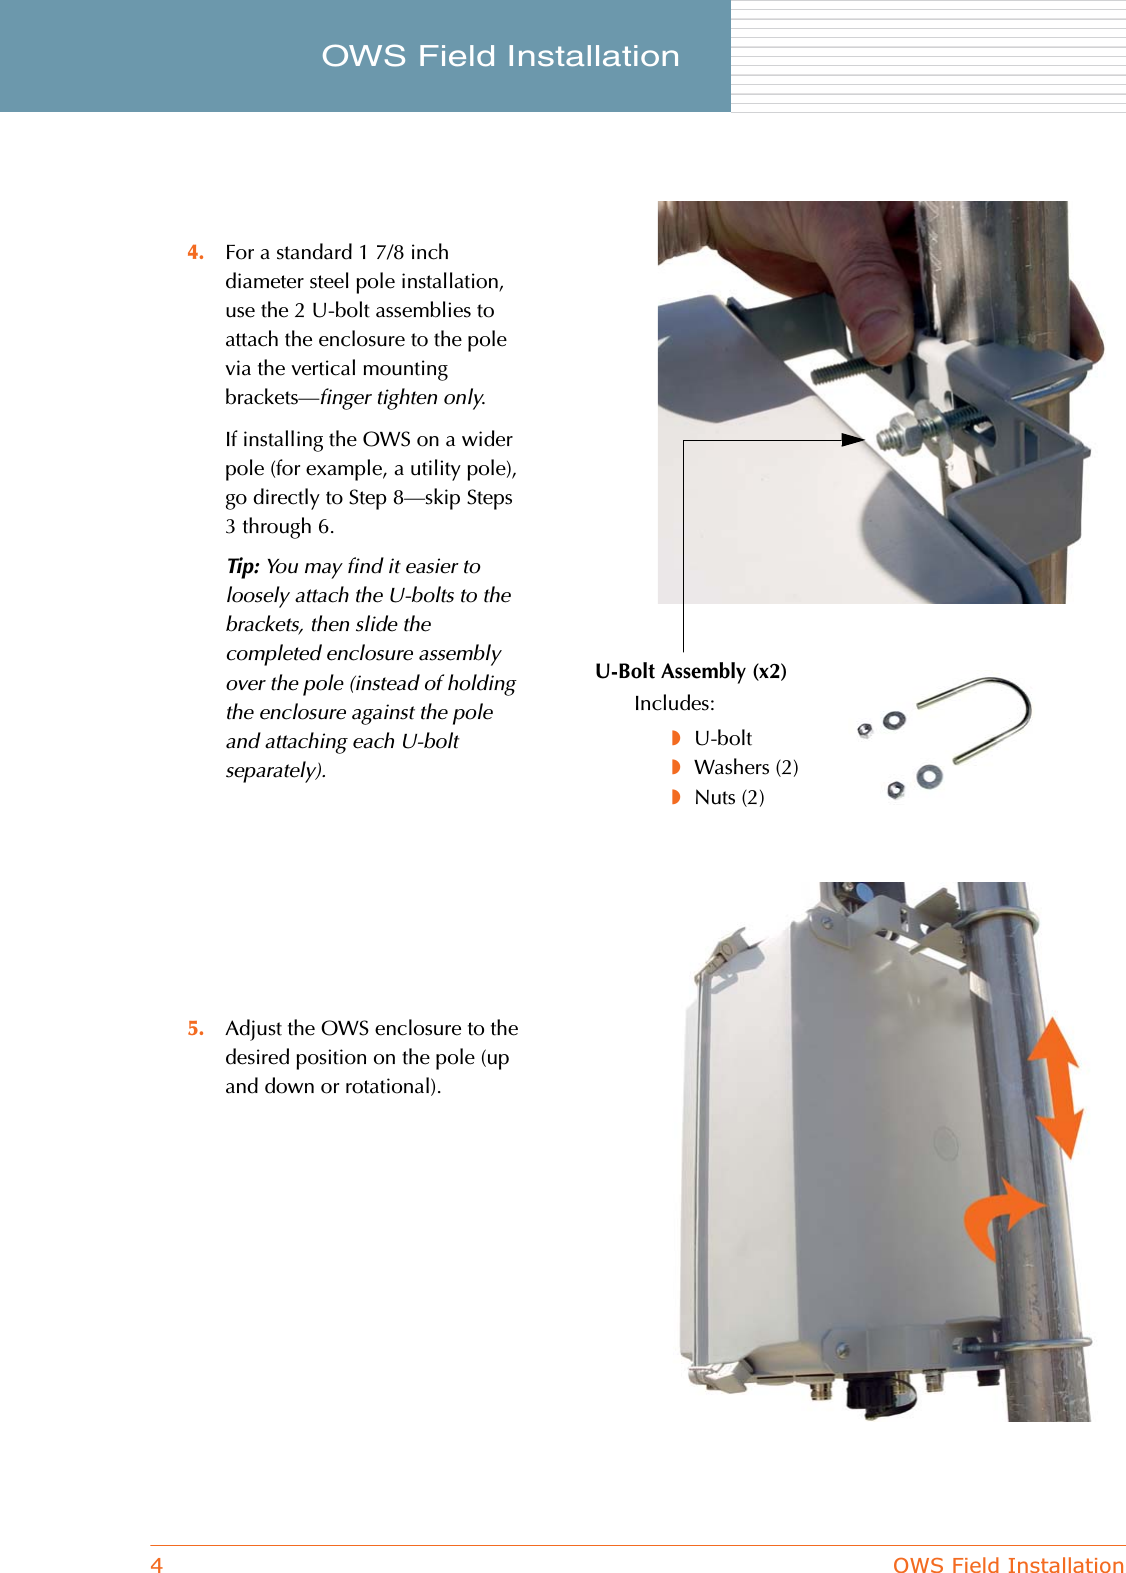 4OWS Field InstallationOWS Field Installation     4. For a standard 1 7/8 inch diameter steel pole installation, use the 2 U-bolt assemblies to attach the enclosure to the pole via the vertical mounting brackets—finger tighten only.If installing the OWS on a wider pole (for example, a utility pole), go directly to Step 8—skip Steps 3 through 6.Tip: You may find it easier to loosely attach the U-bolts to the brackets, then slide the completed enclosure assembly over the pole (instead of holding the enclosure against the pole and attaching each U-bolt separately).5. Adjust the OWS enclosure to the desired position on the pole (up and down or rotational).U-Bolt Assembly (x2)Includes:◗U-bolt◗Washers (2)◗Nuts (2)